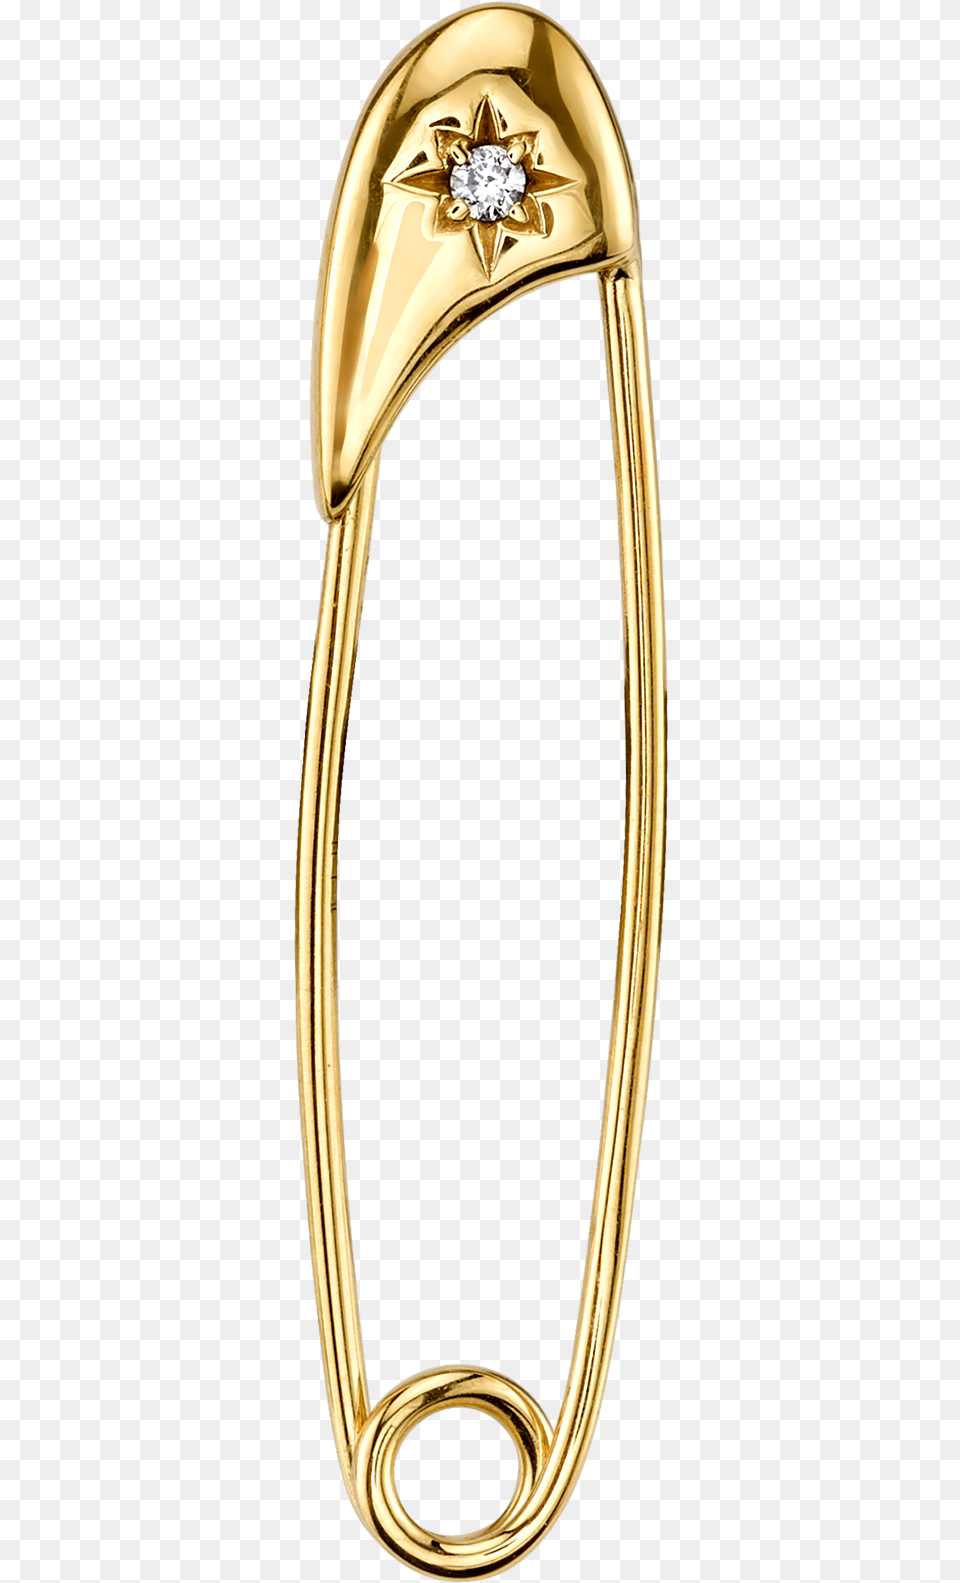 The Last Line Safety Pin39s Image Lapel Pin, Accessories, Gold, Jewelry, Ring Free Png Download